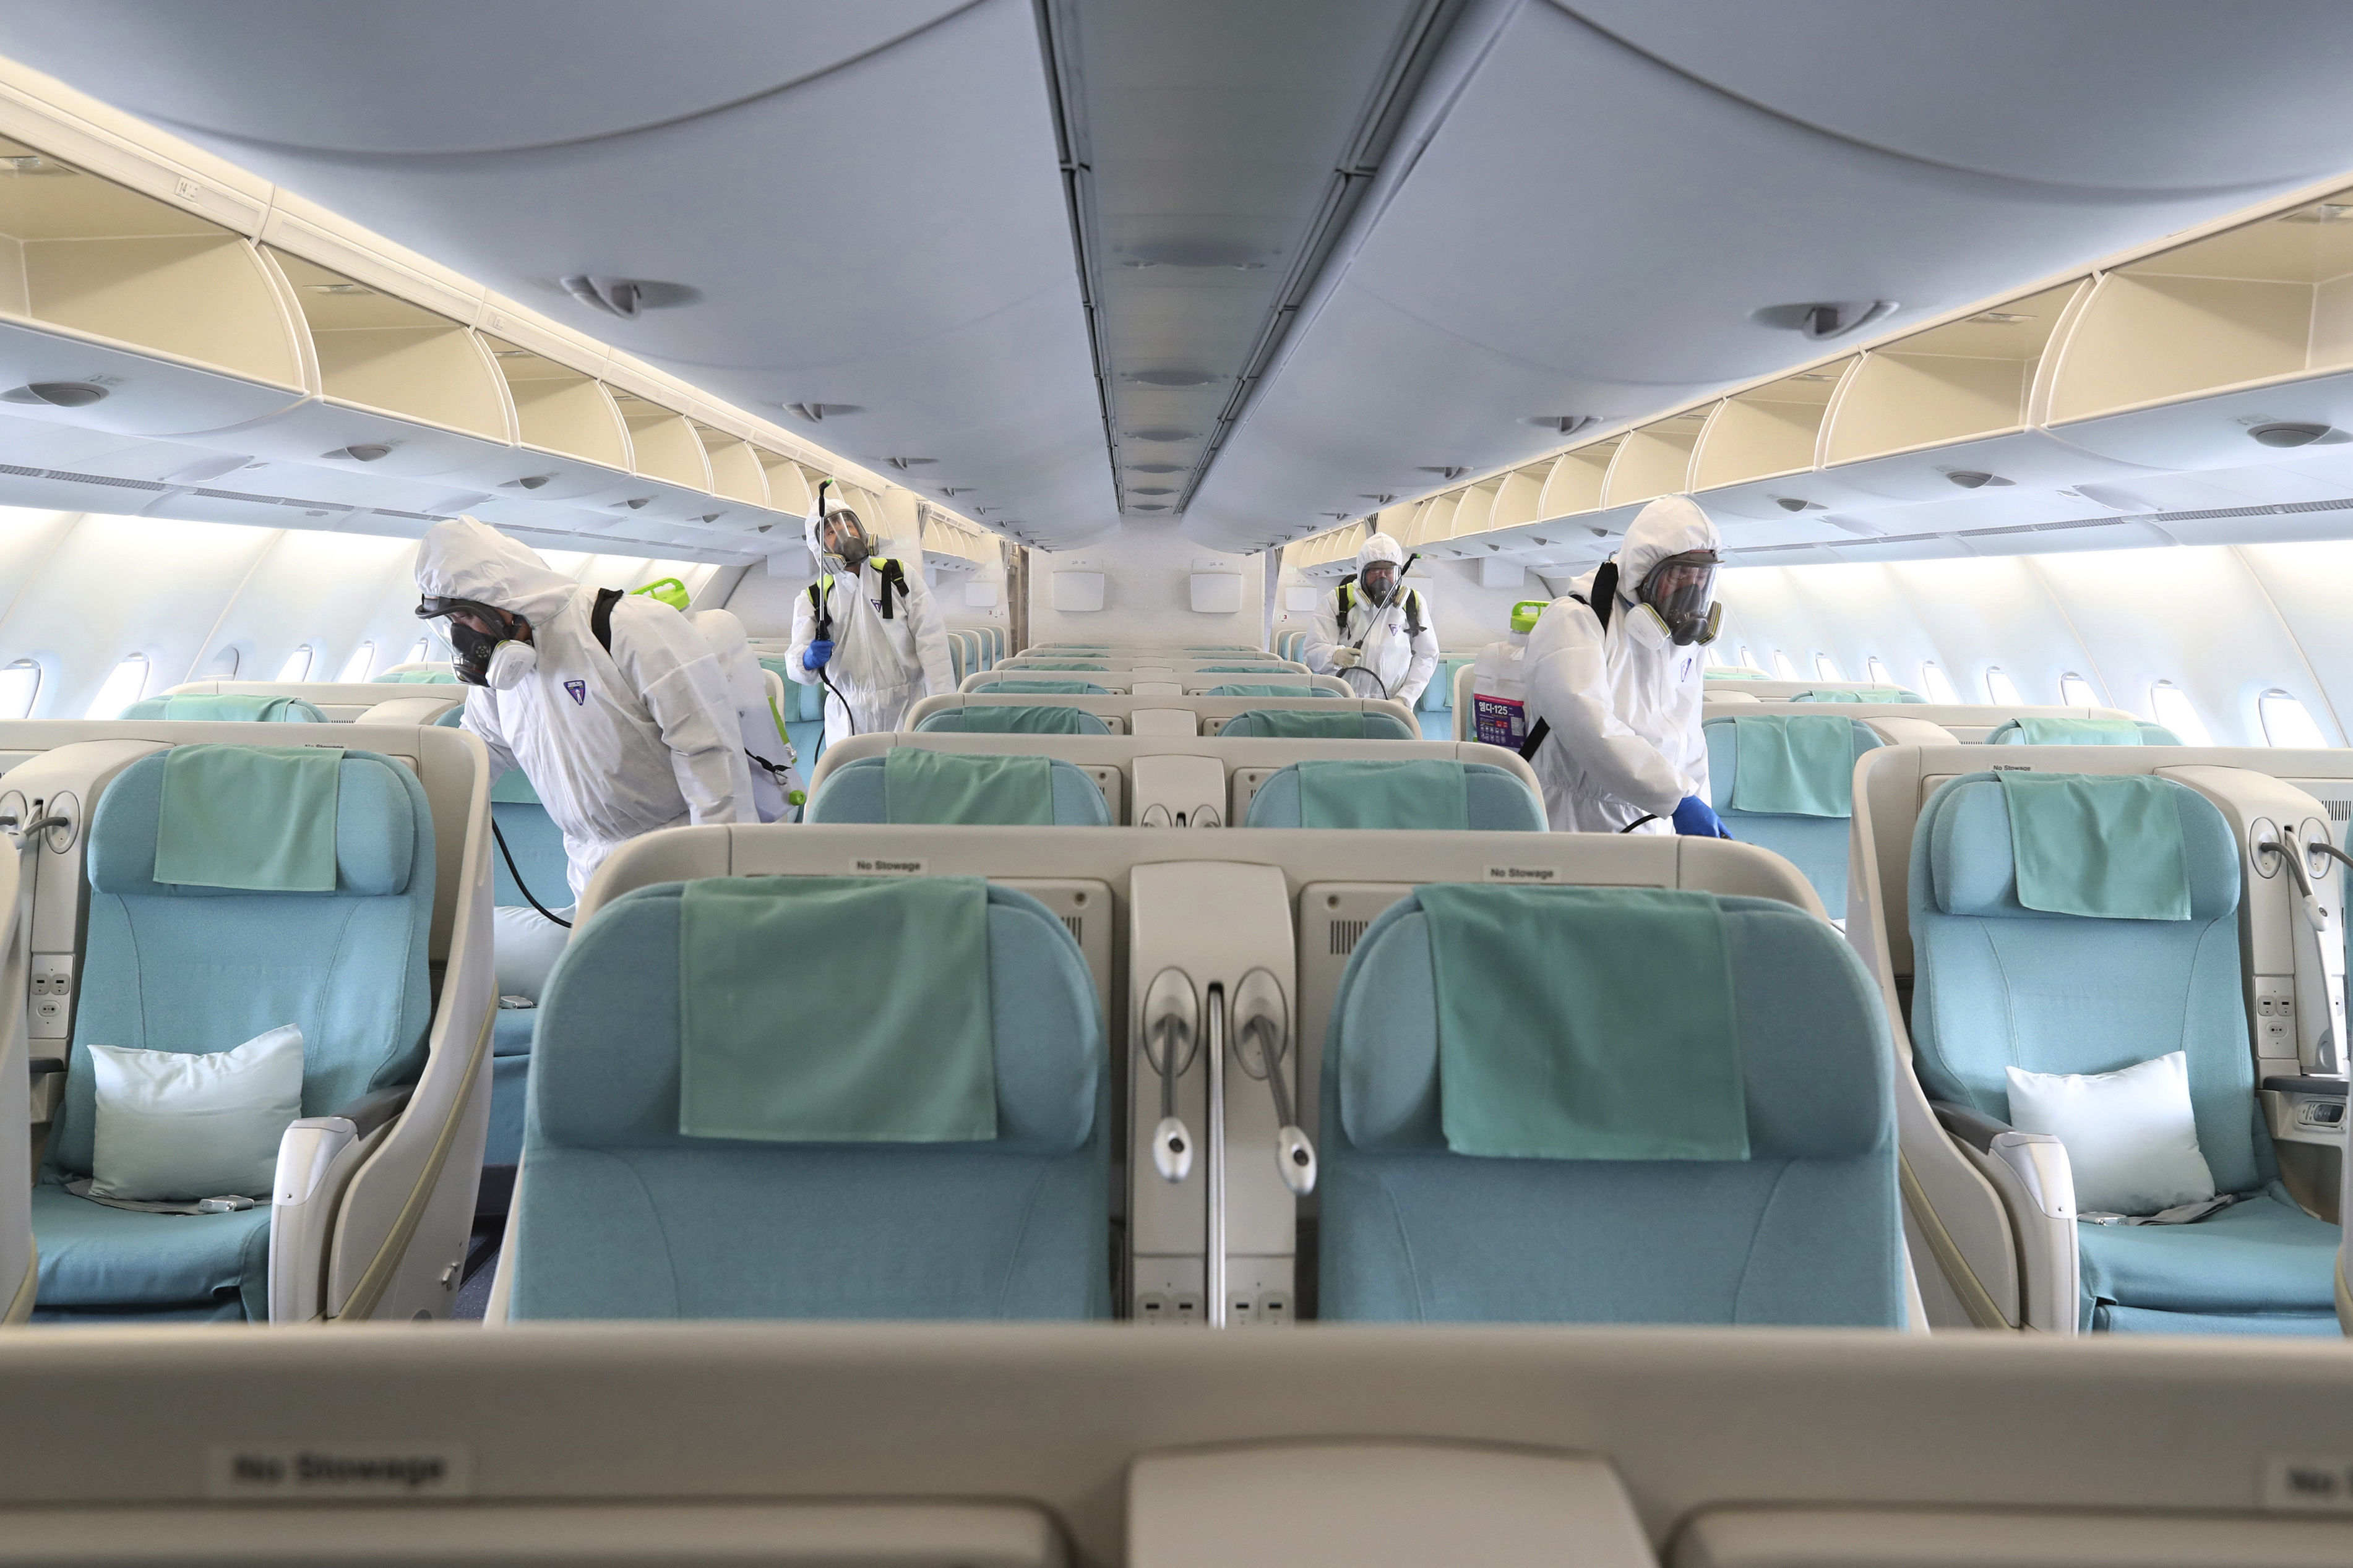 Workers wearing protective gears spray disinfectant inside an airplane bound for New York at Incheon International Airport in Incheon, South Korea, on Wednesday, March 4.